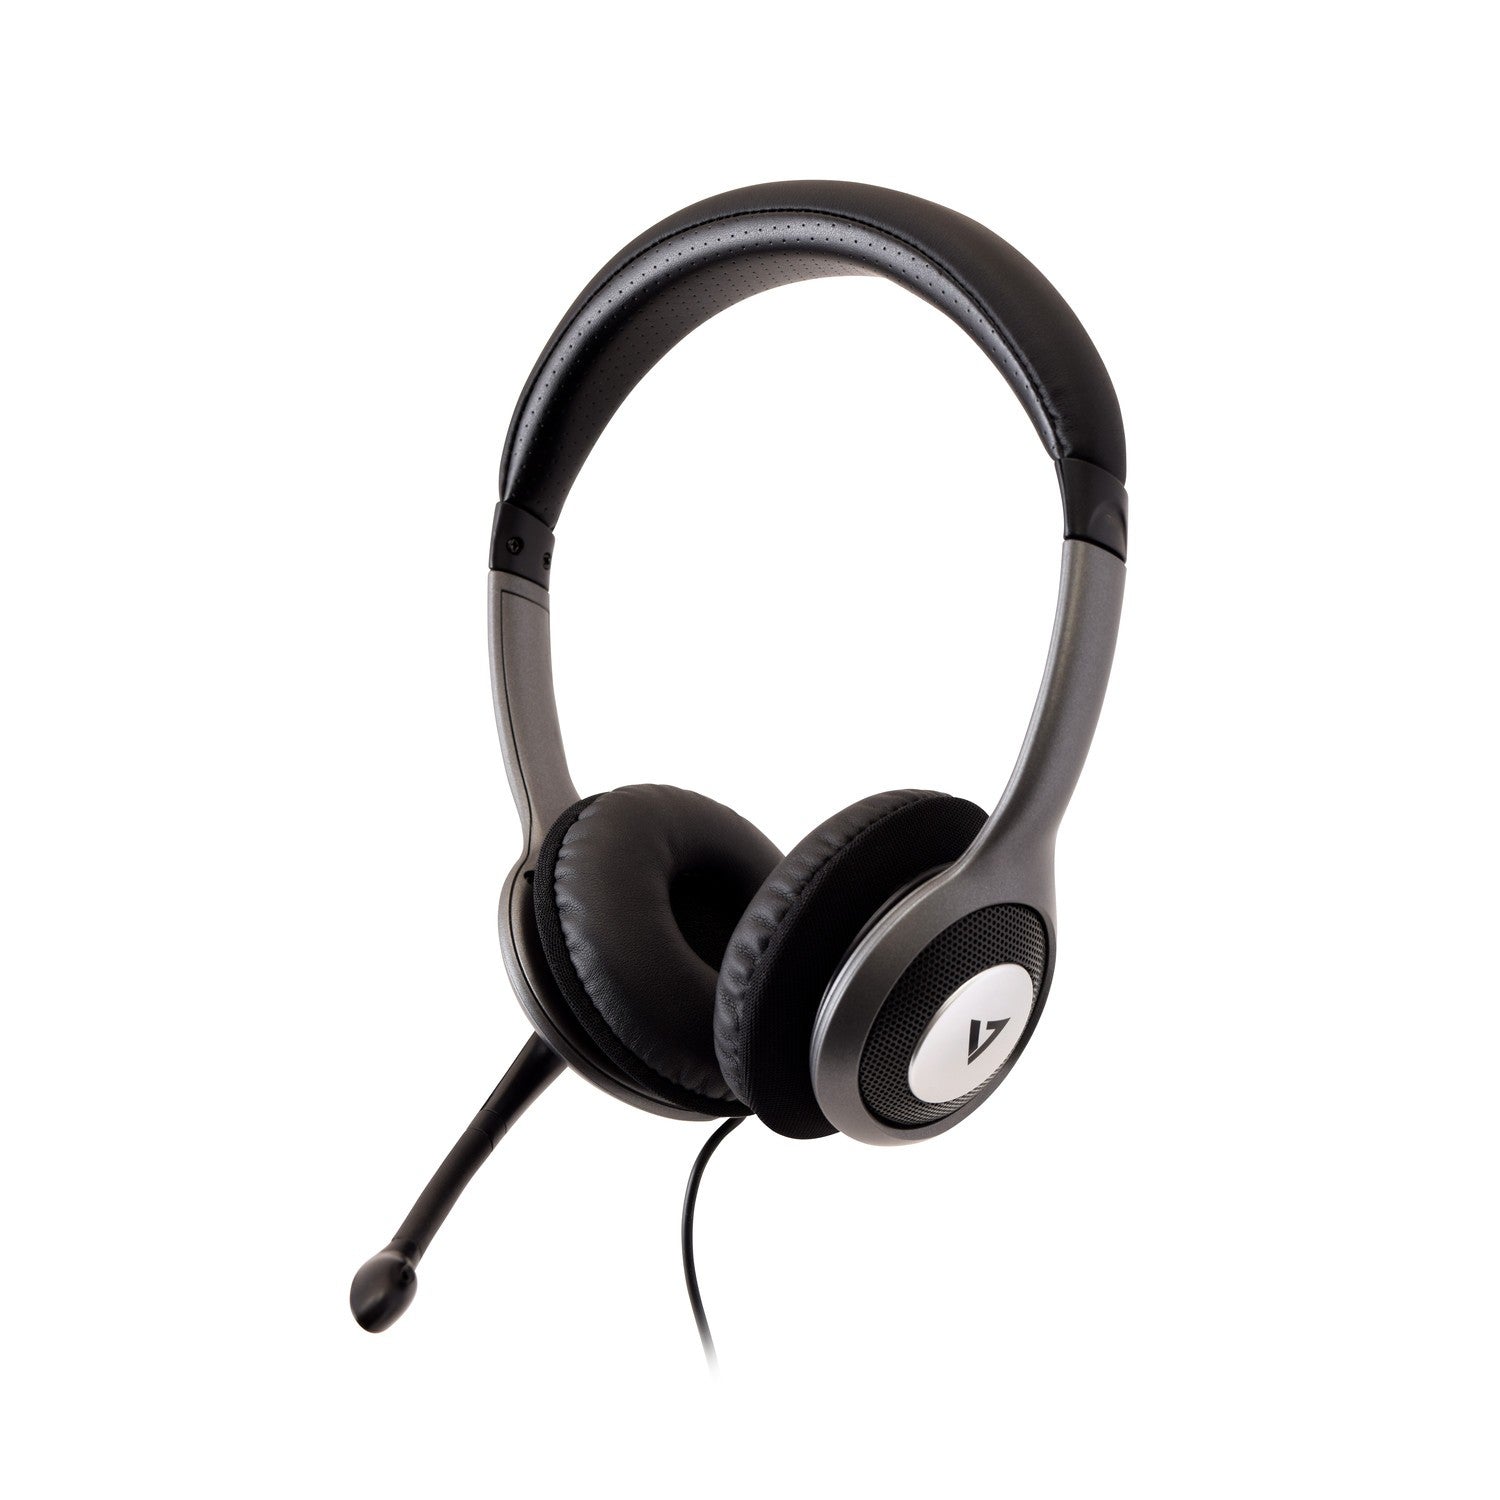 V7 HU521-2EP headphones/headset Wired Head-band Office/Call center Black, Silver